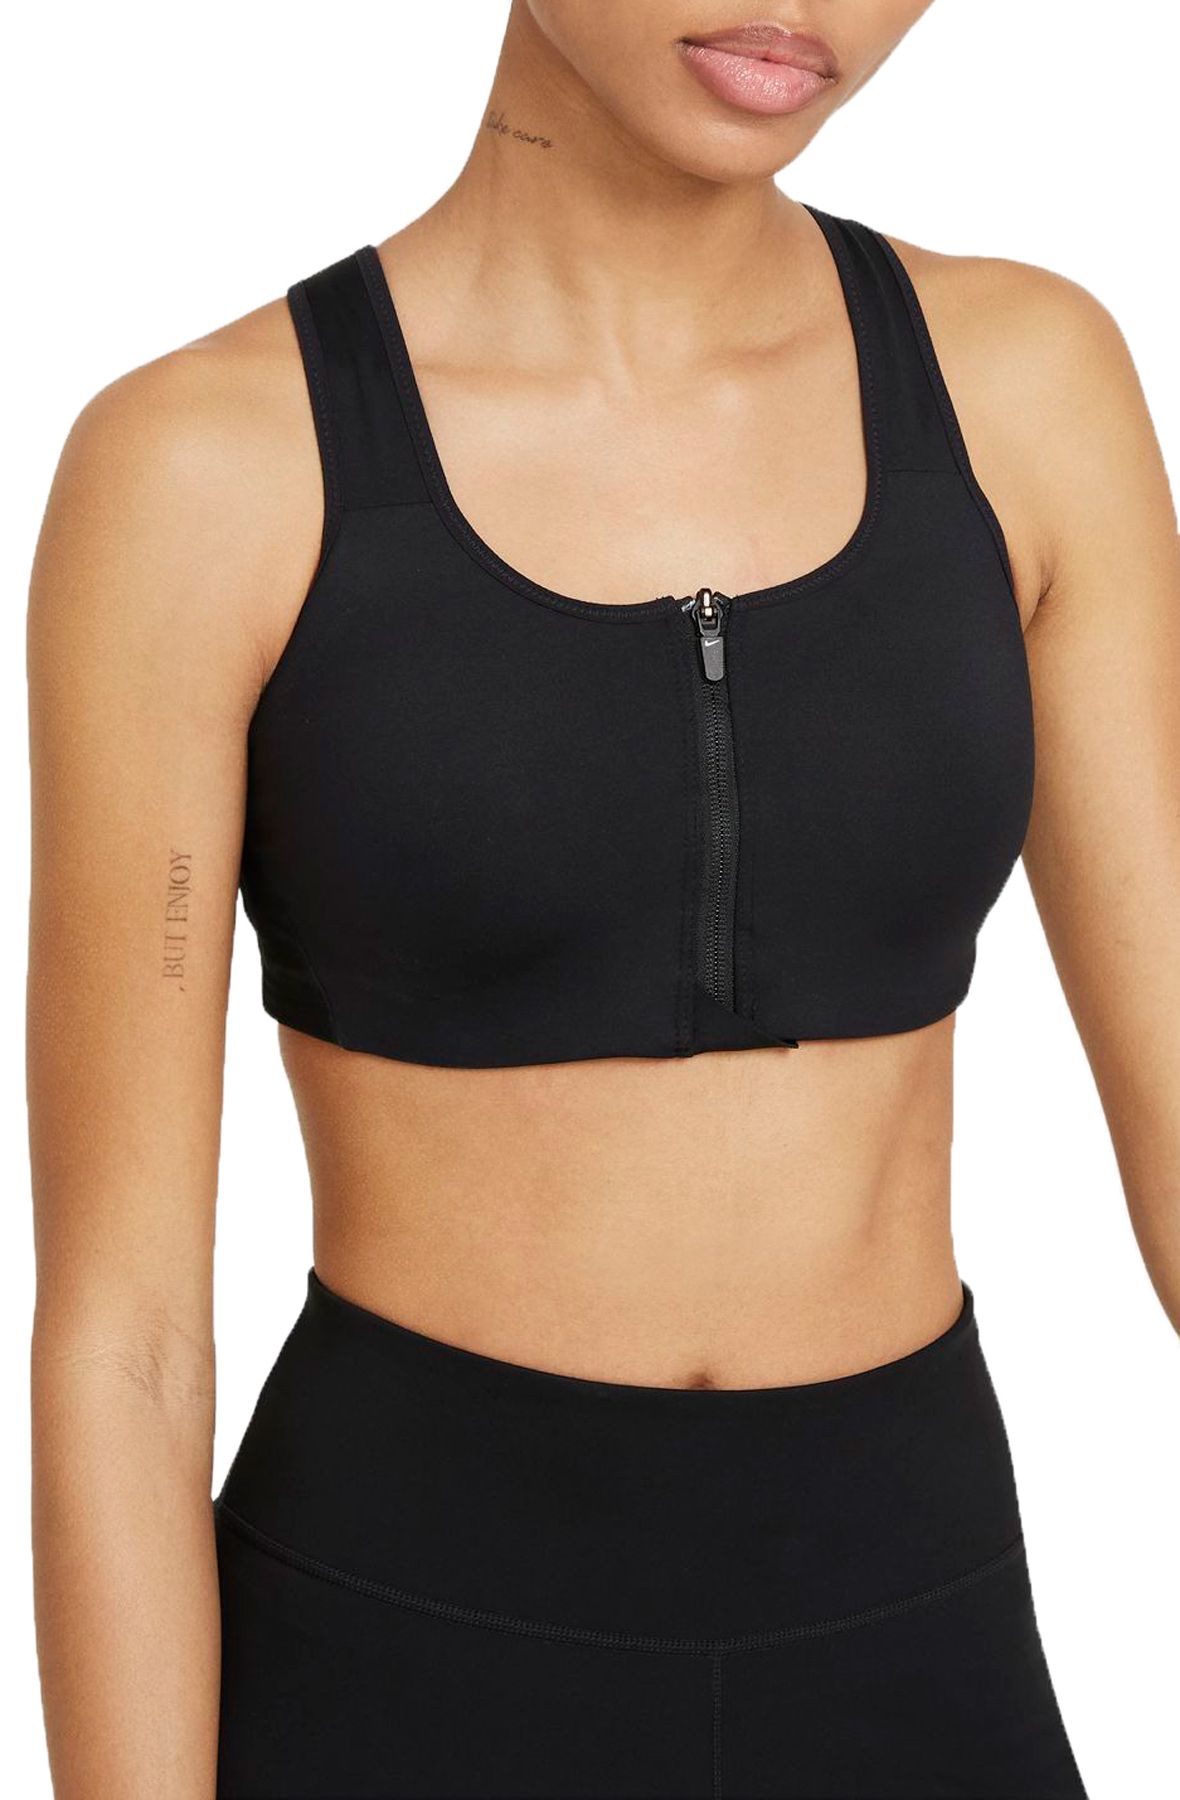 Nike Zippered High Support Padded Sports Bra Black Size XS - $49 New With  Tags - From solecal